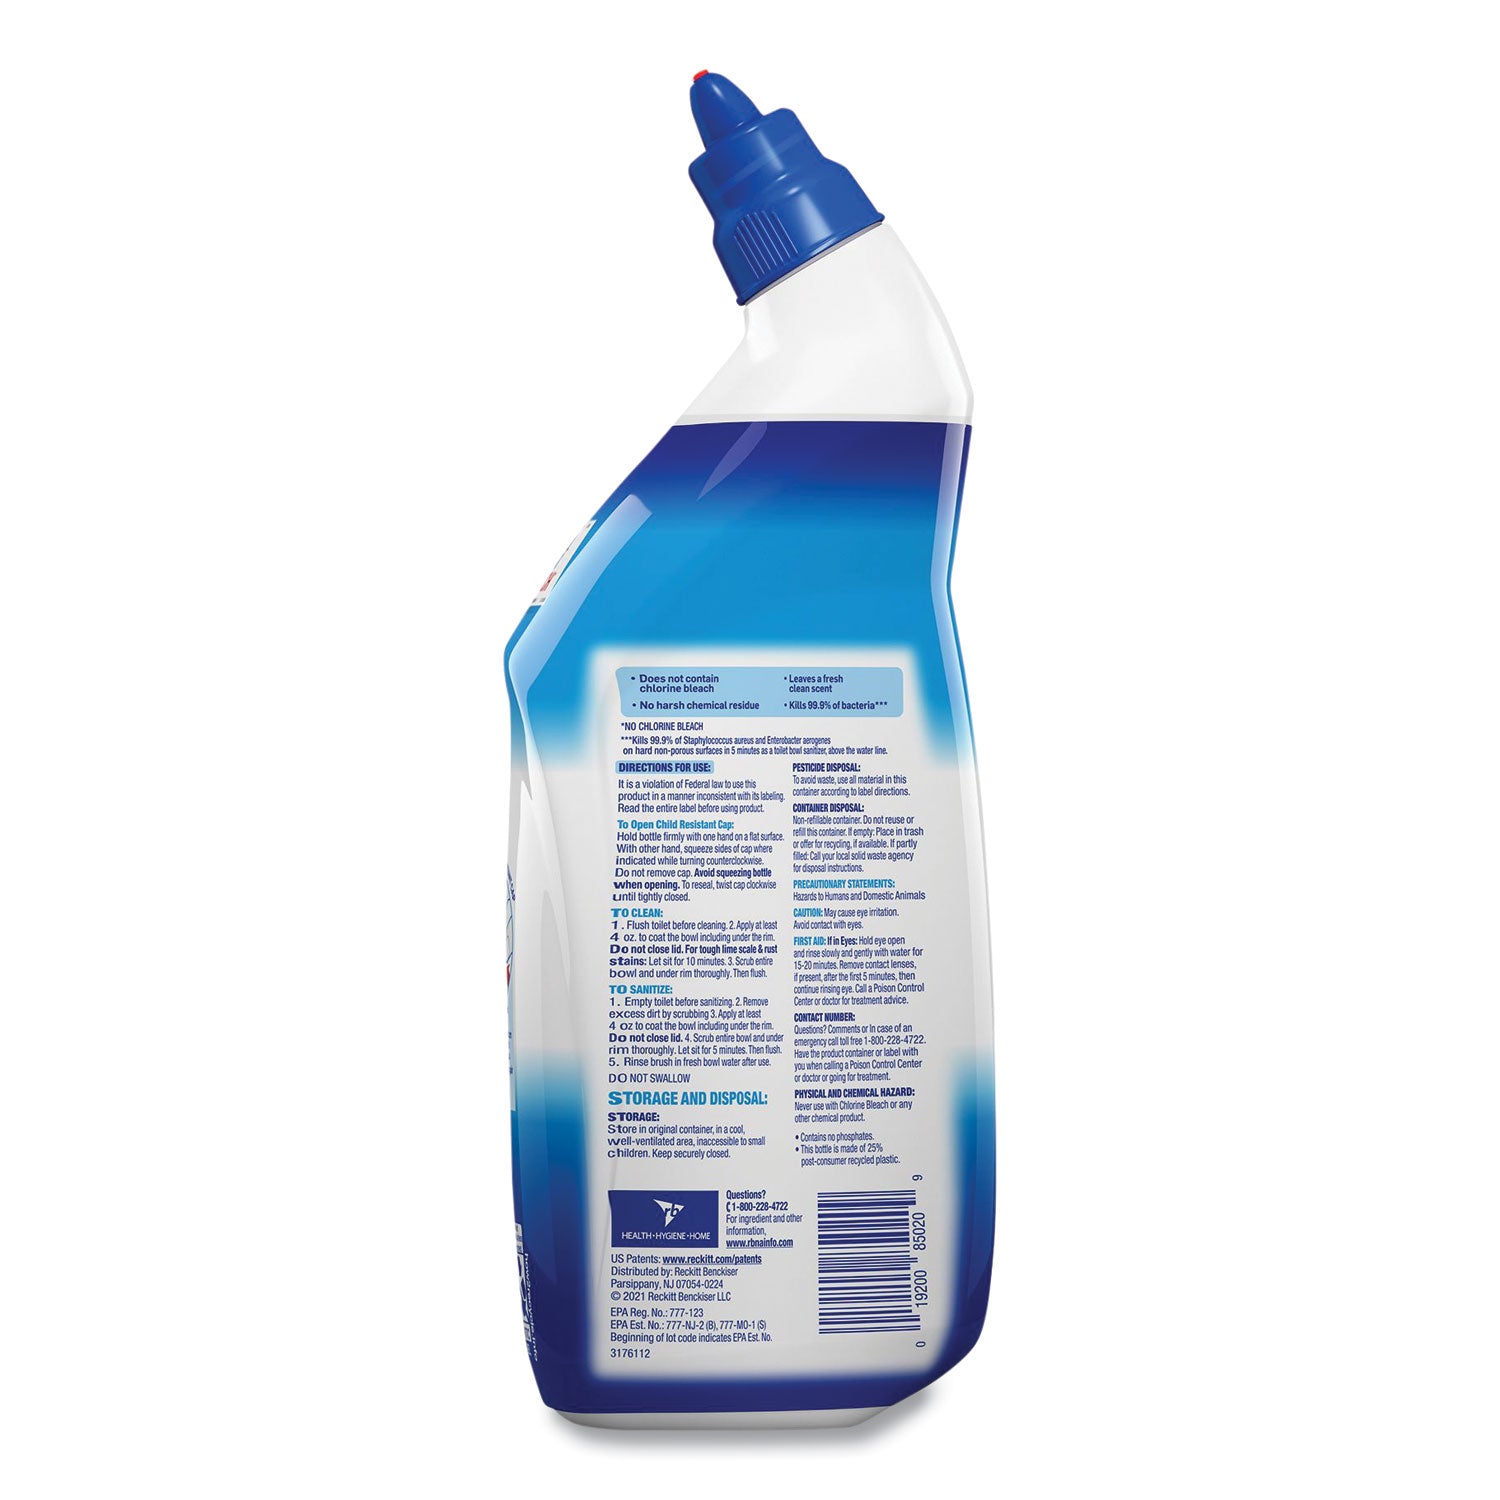 toilet-bowl-cleaner-with-hydrogen-peroxide-ocean-fresh-scent-24-oz-9-carton_rac98011 - 3